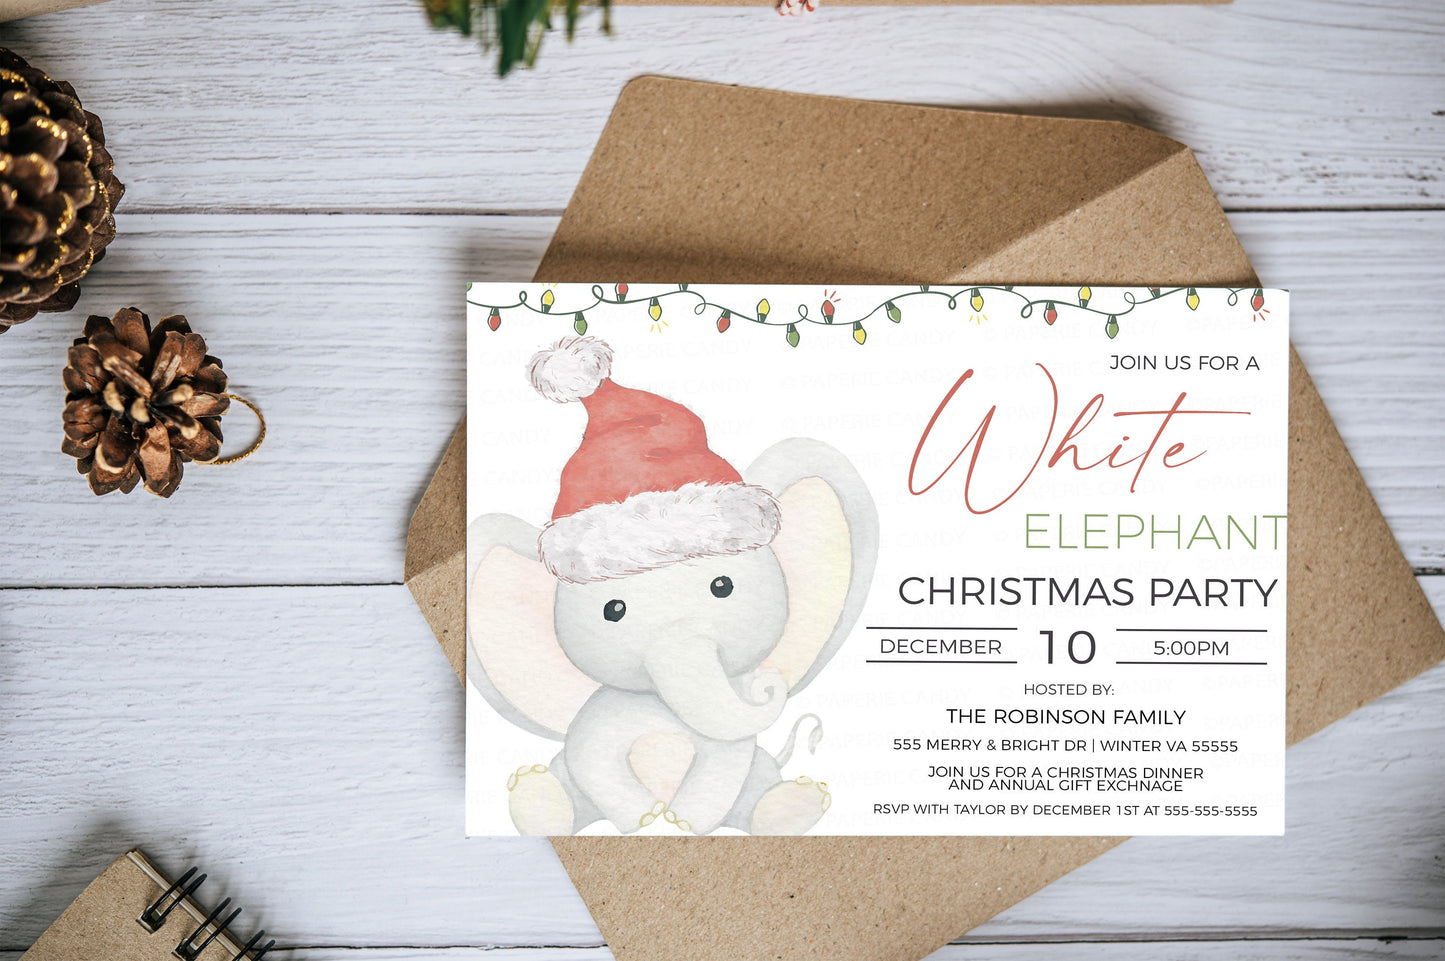 White Elephant Party Invitation, Gift Exchange Invite, Friends Family Business Company Staff Employee Work Party Editable Printable Template